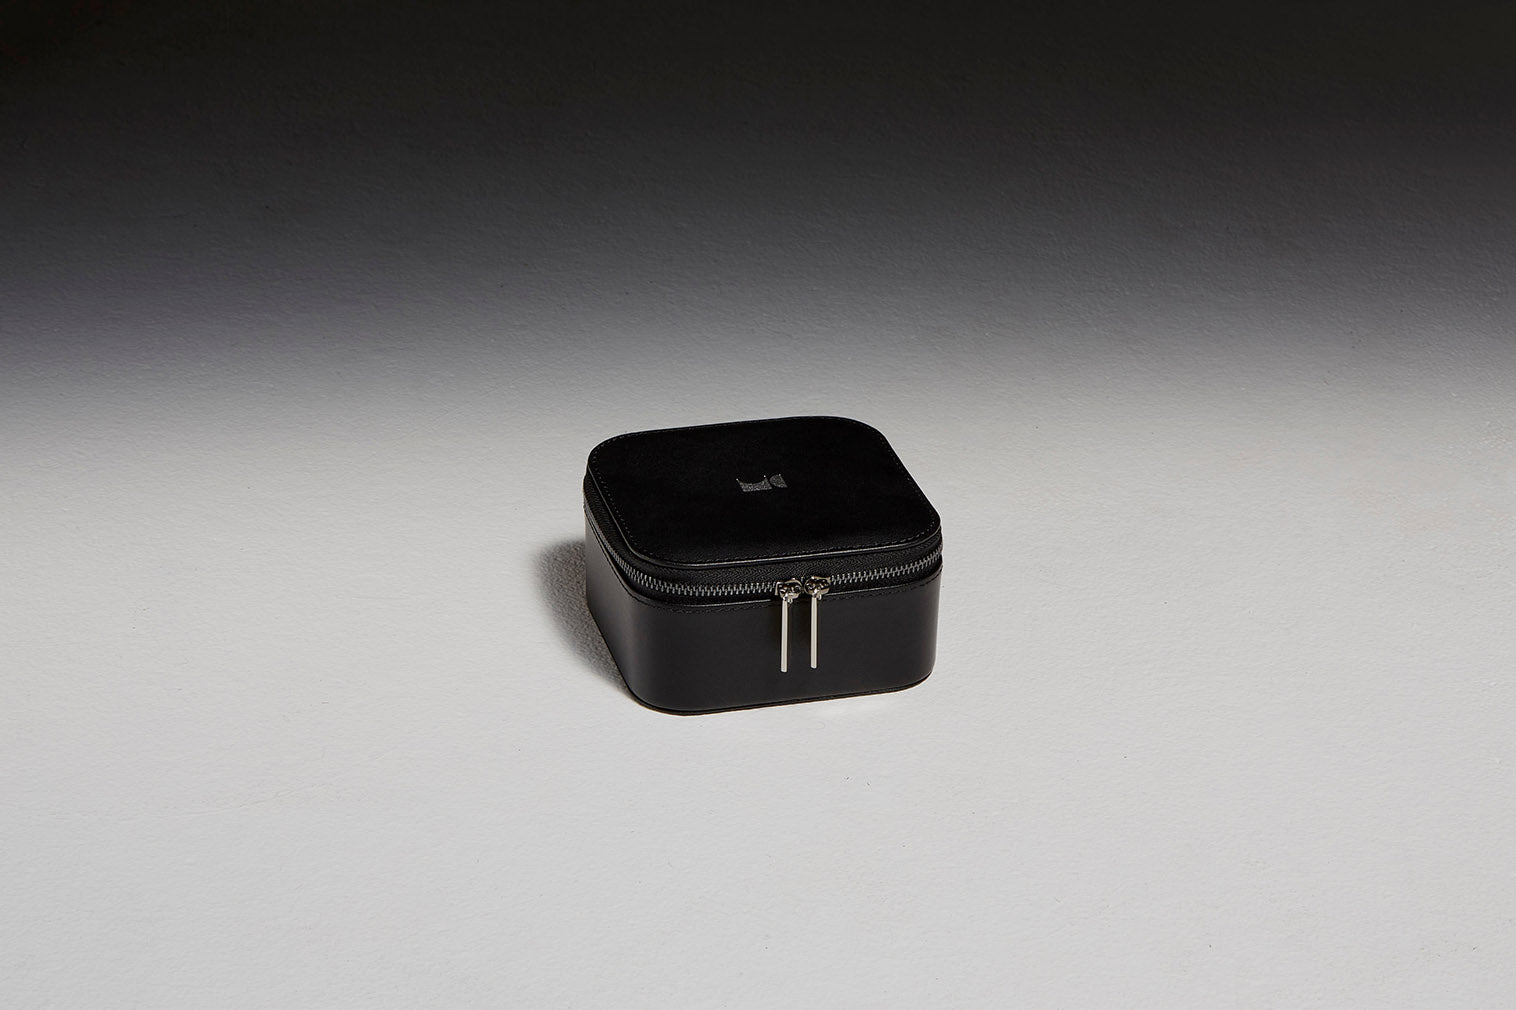 Black leather jewelry case sitting in front of a black backdrop